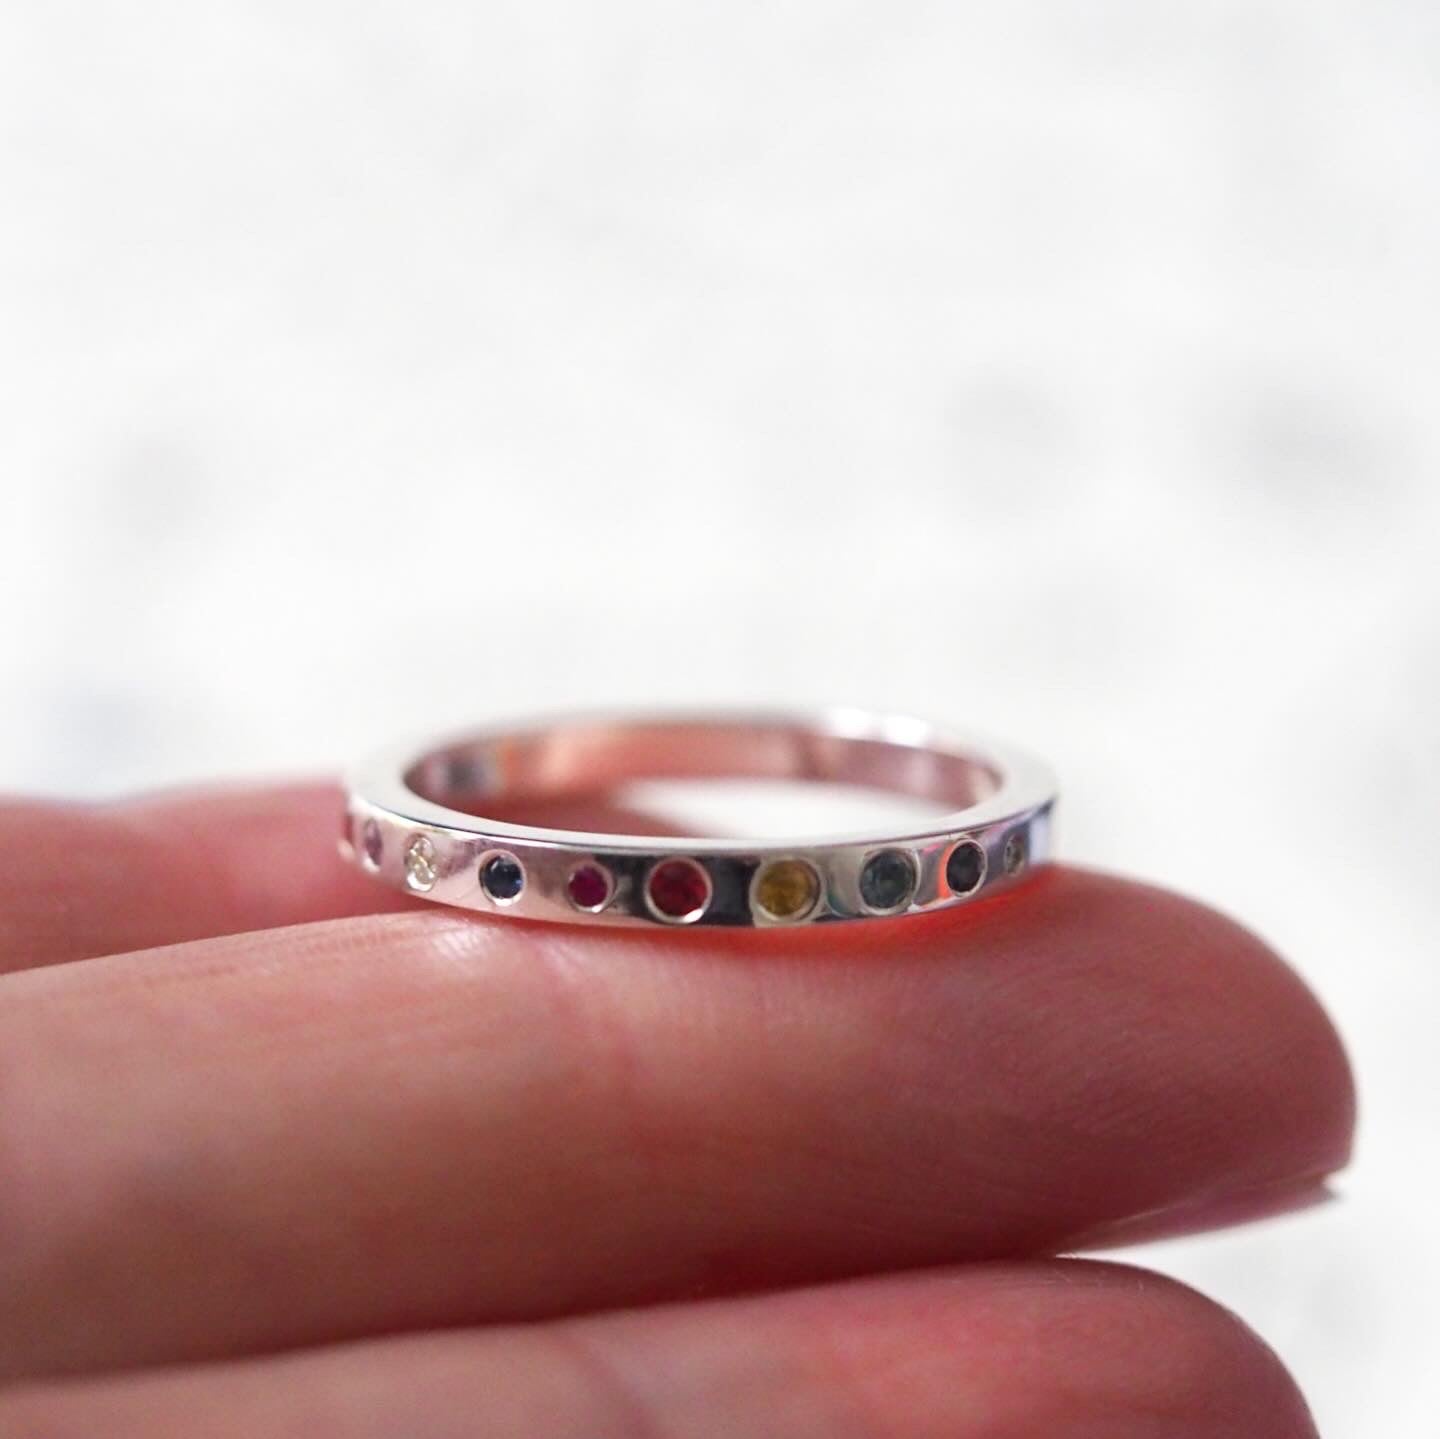 Mini Planet Ring in Sterling Silver